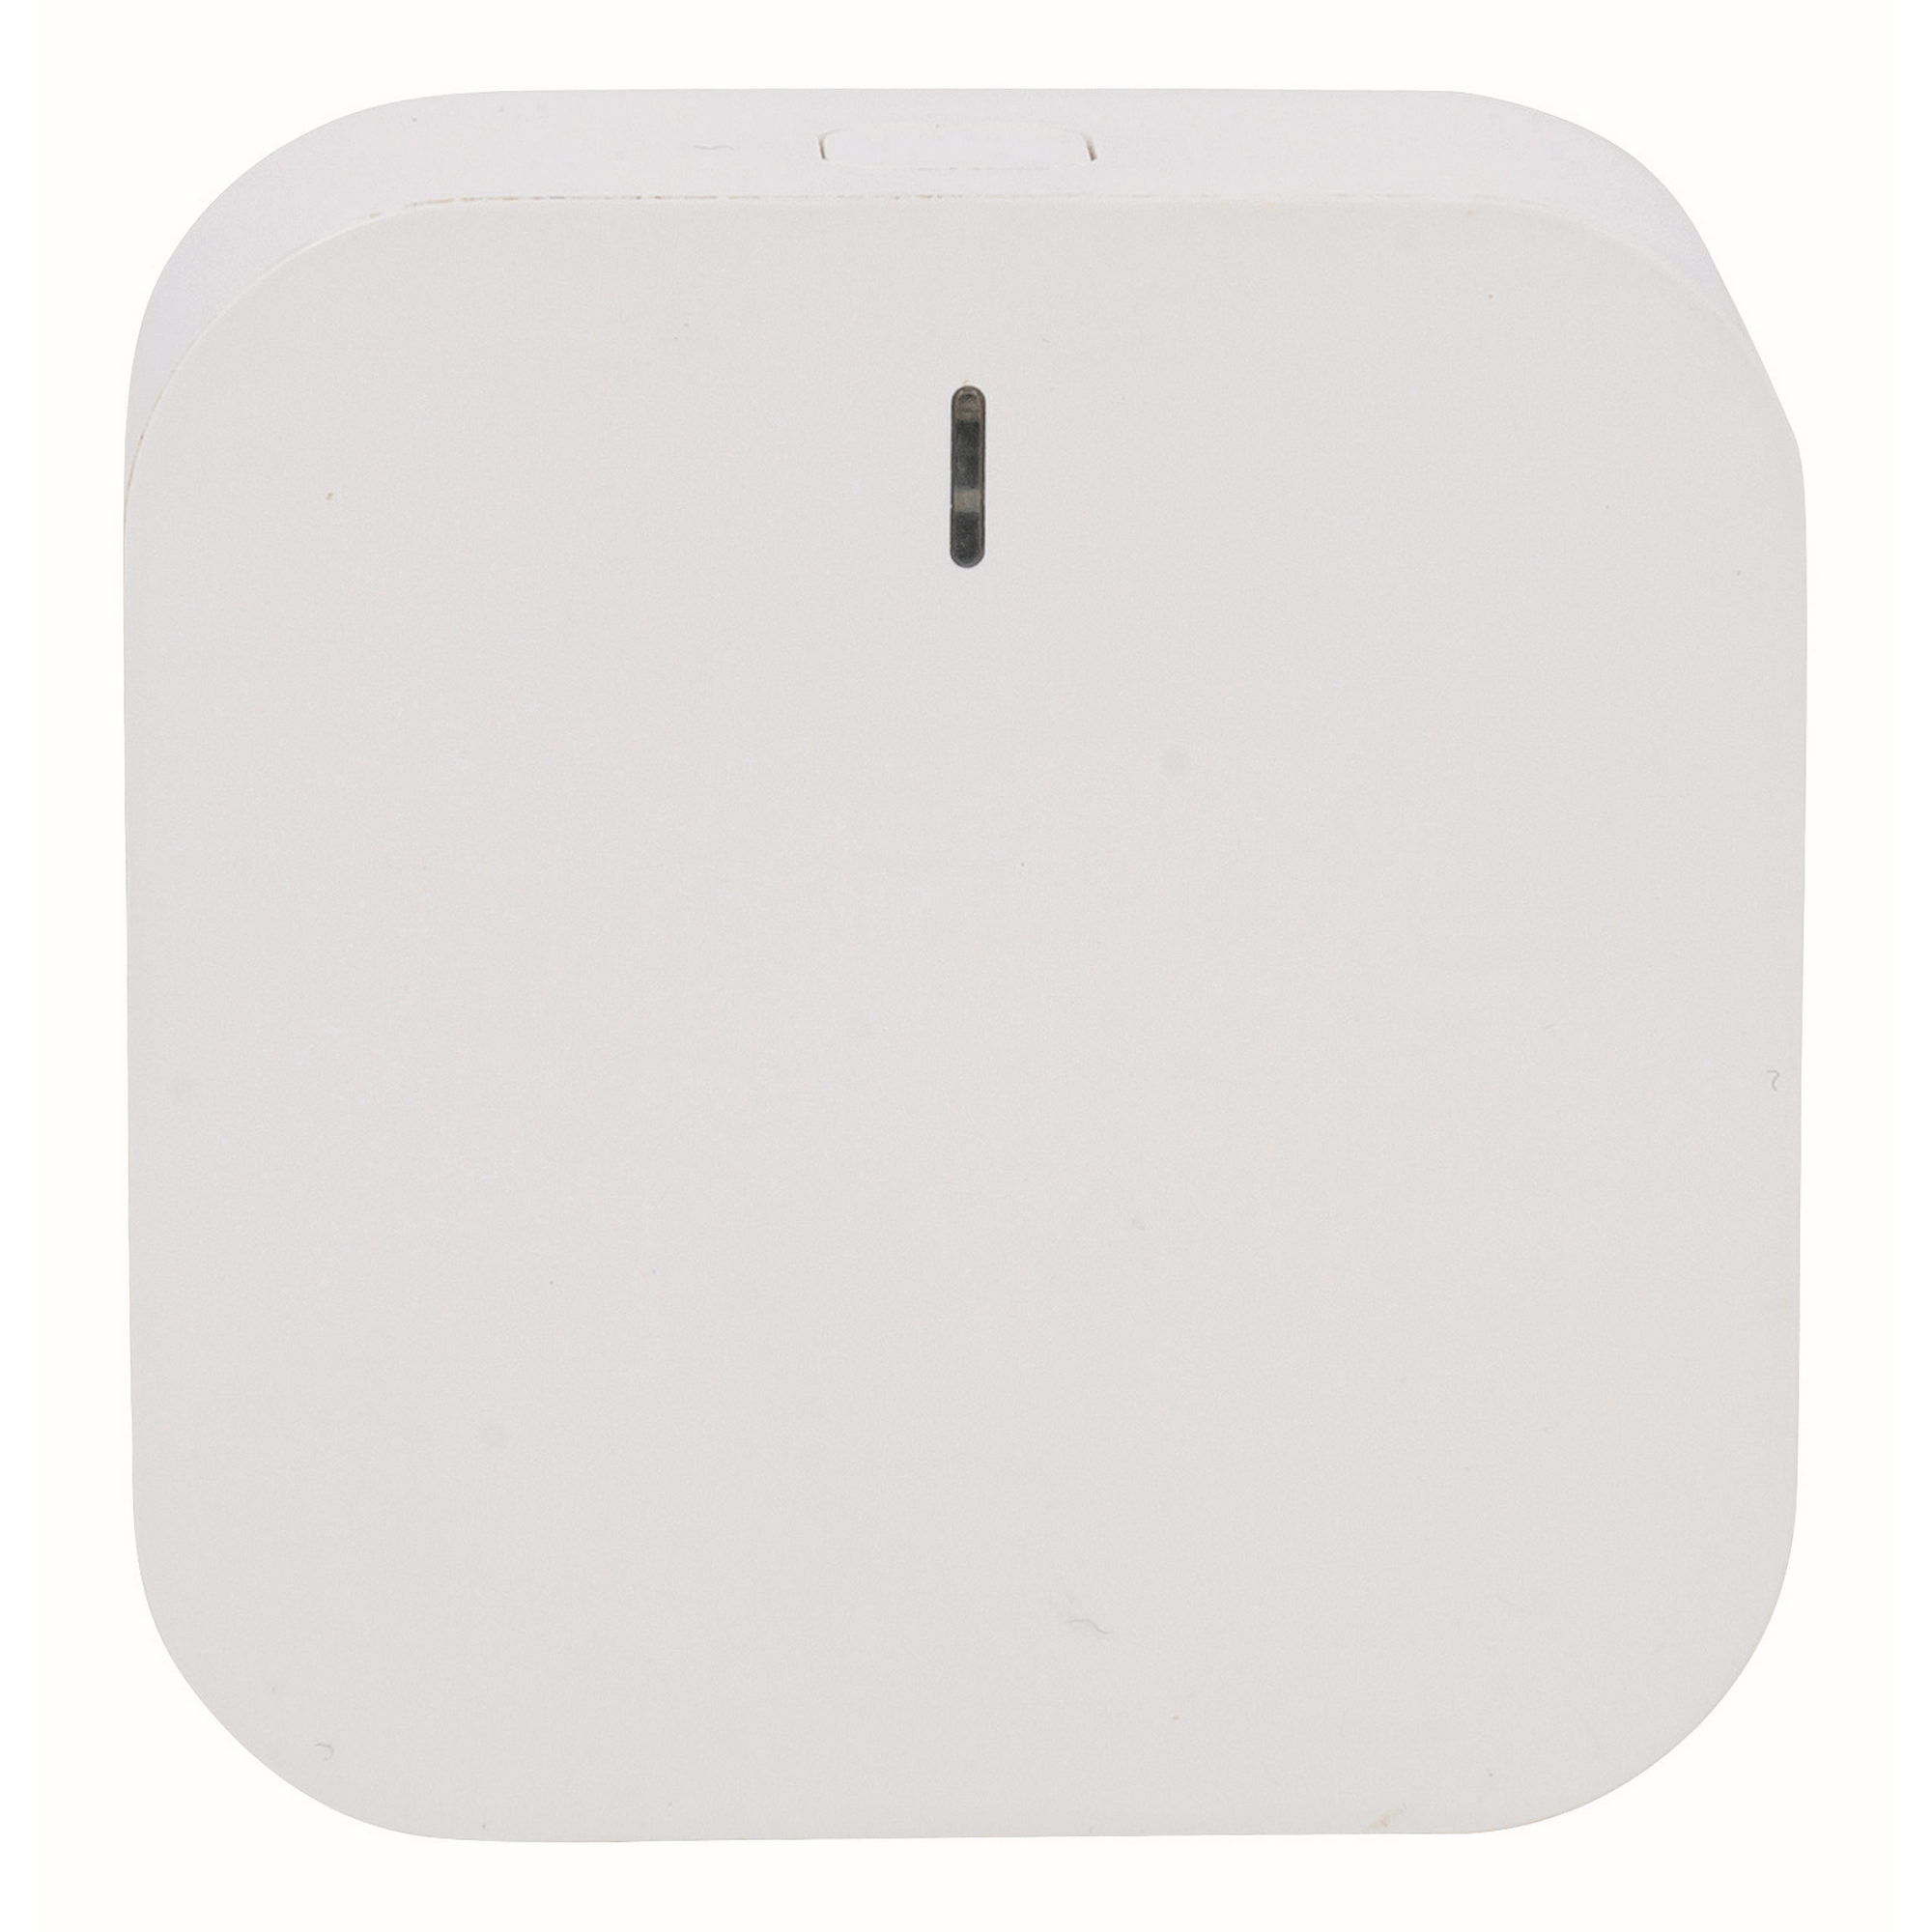 Heizkörperthermostat-Set Smart Home ZigBee 3-teilig + product picture